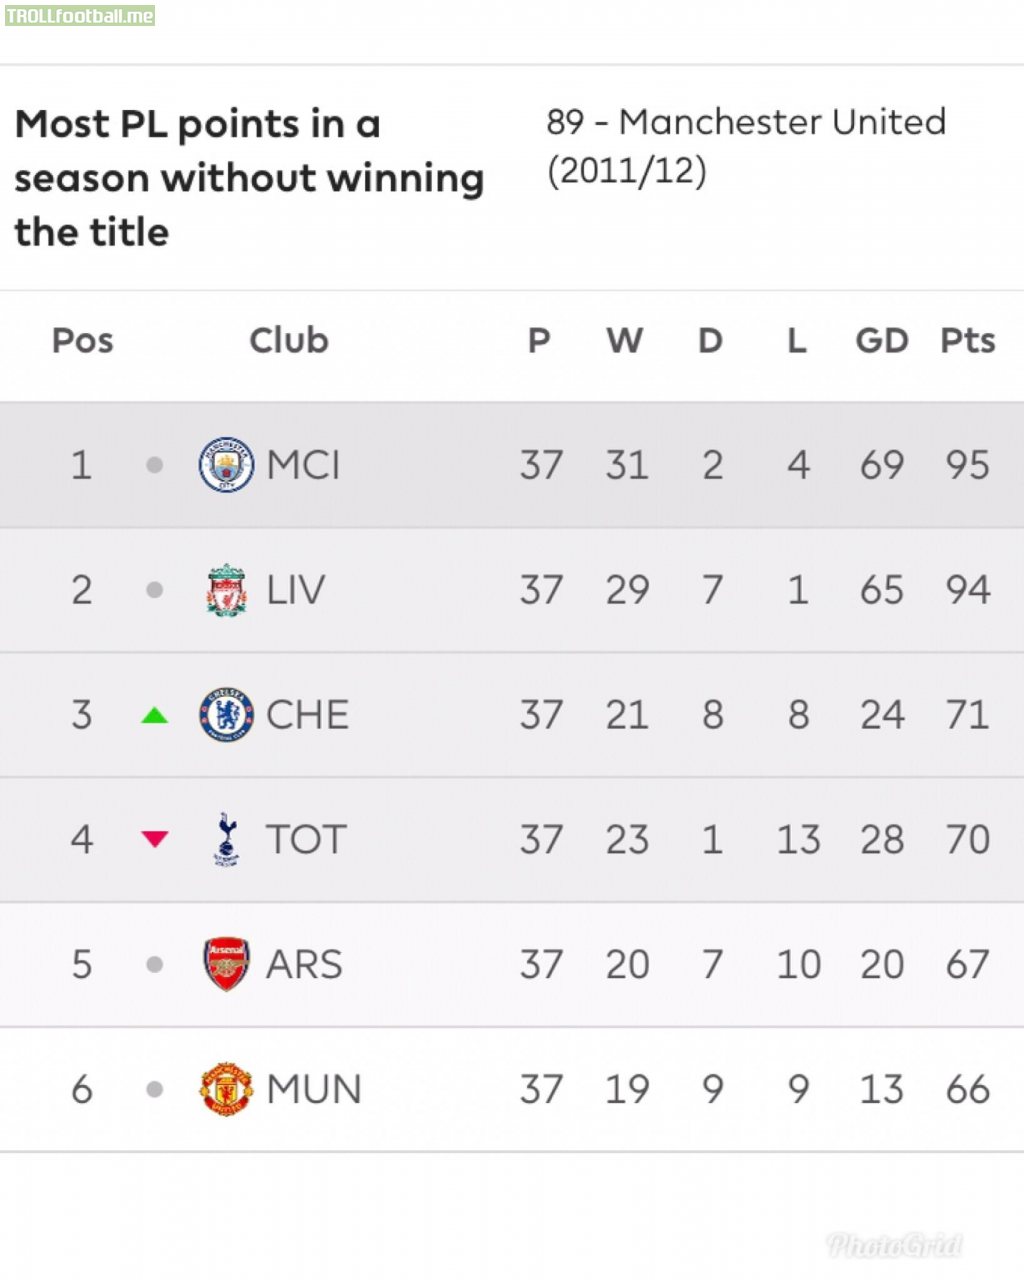 Previous highest points in a season without winning was from THAT Aguero moment in 2011/2012, Liverpool and City are both well passed that. I’m a City fan, but one of these two great sides is not going to win the title this year - huge respect to both!